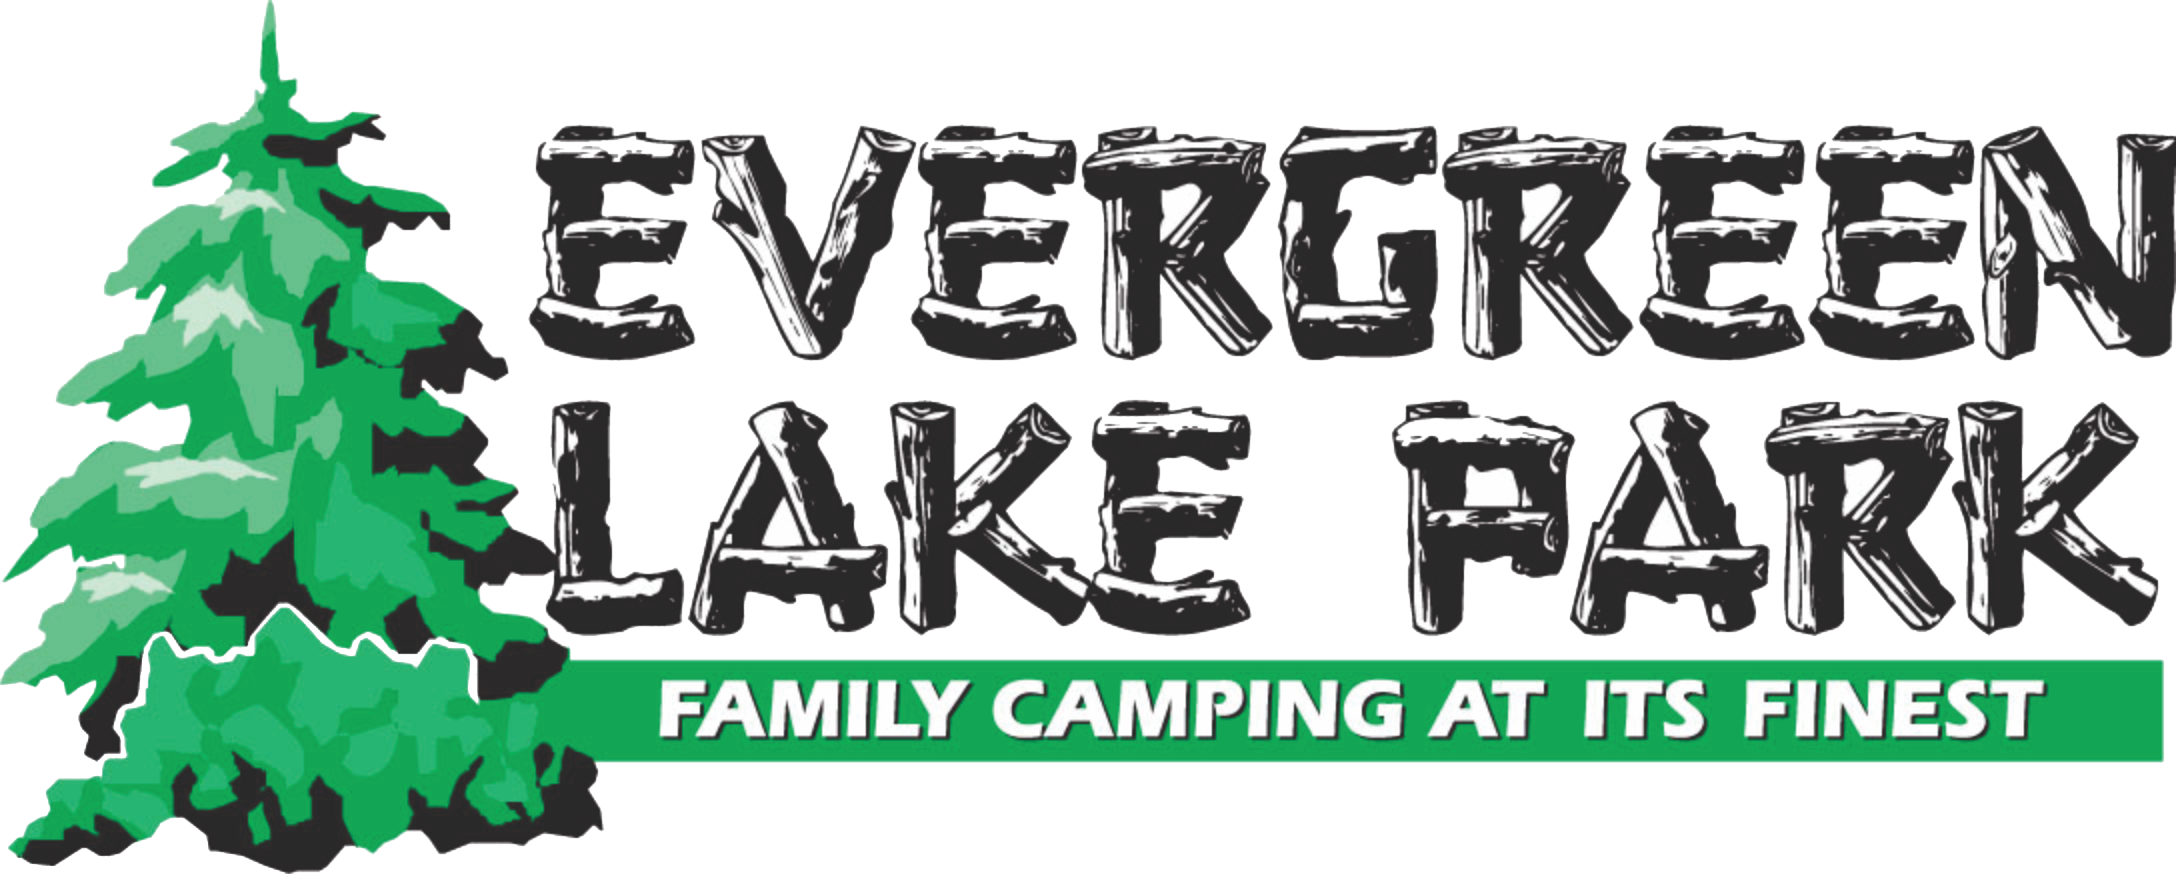 Evergreen Lake Park Campgrounds | Camping Conneaut, Ohio